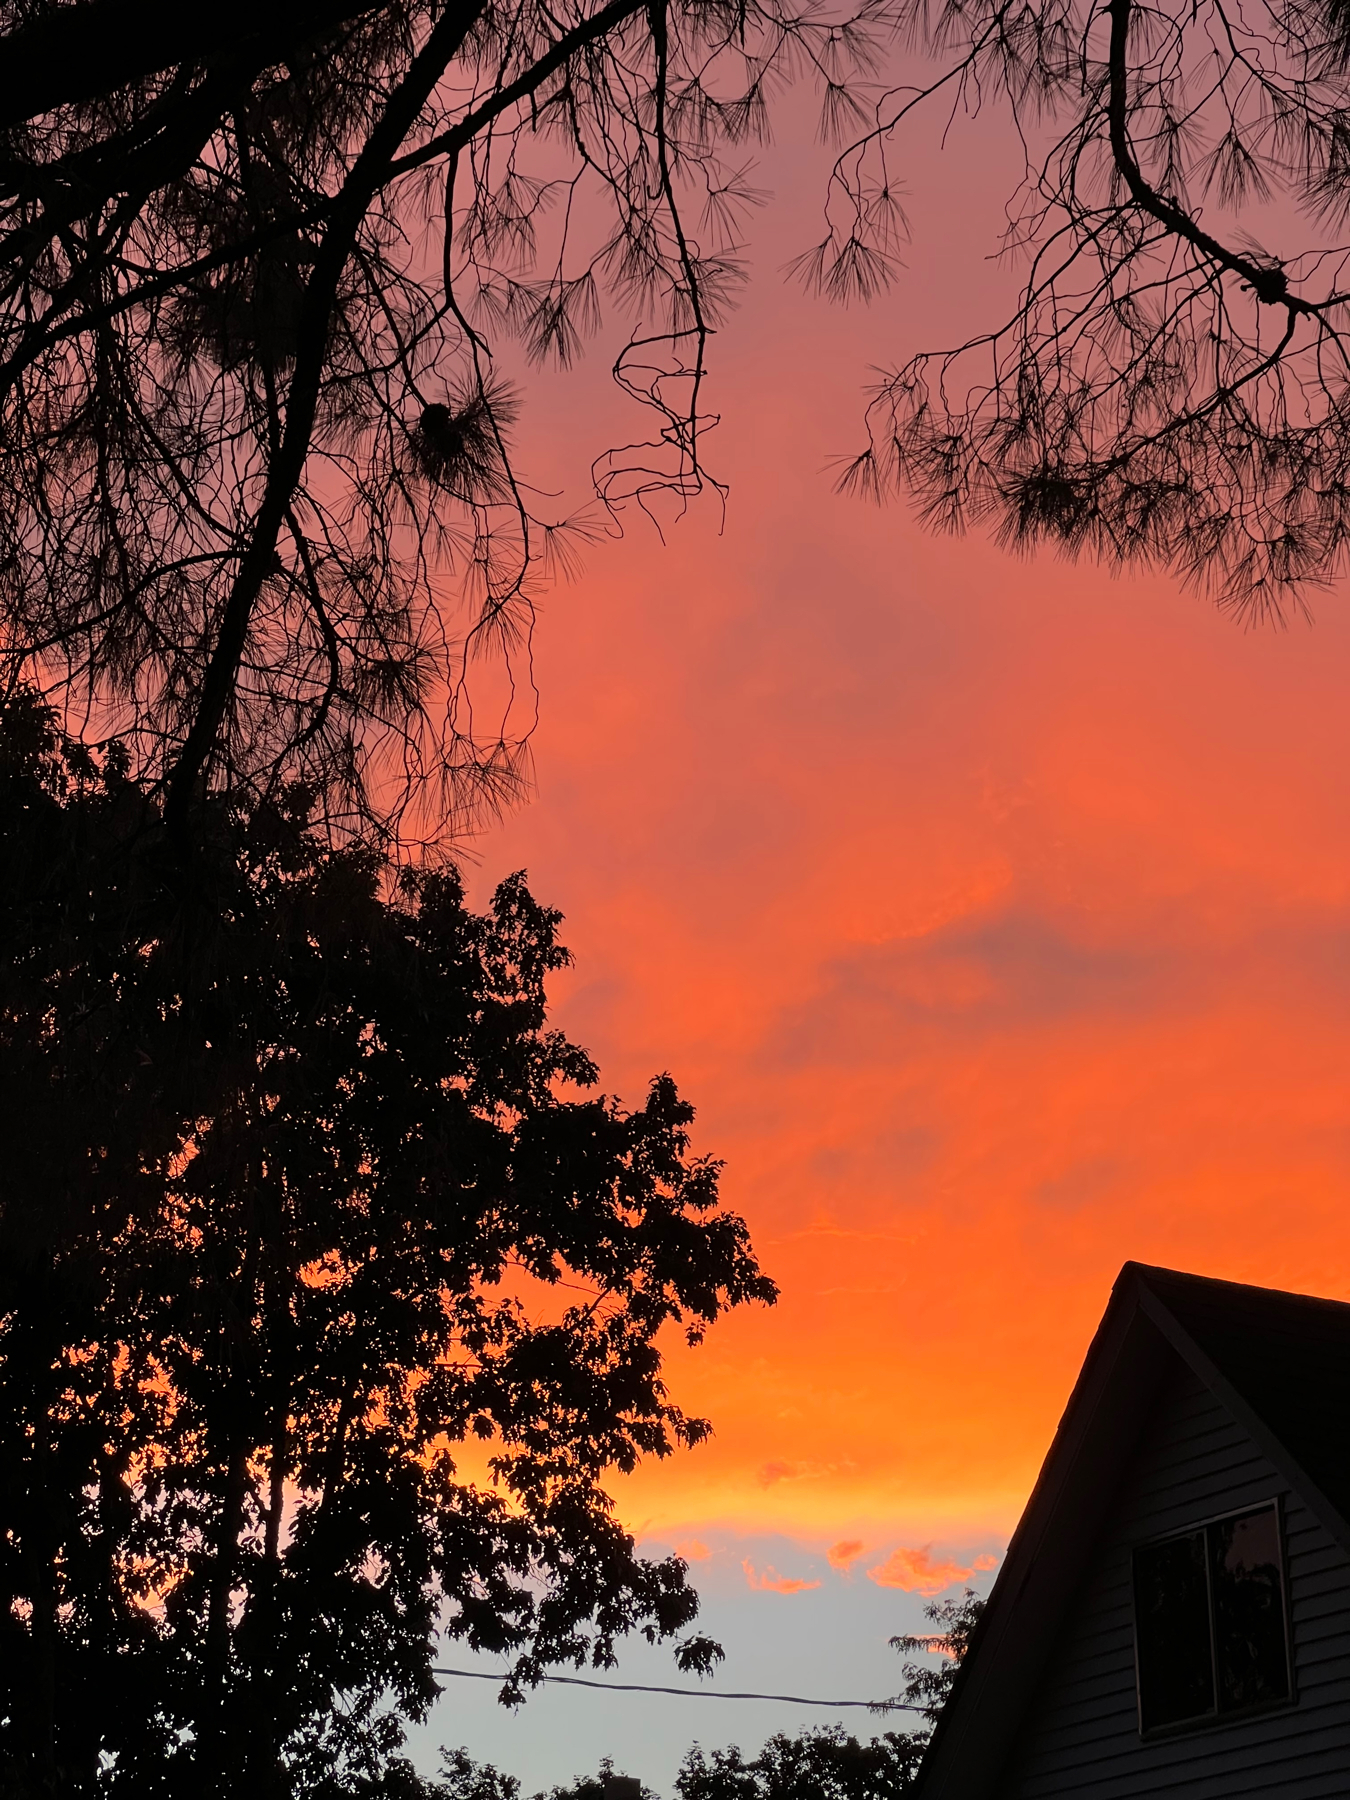 Sunset with clouds and gradients of red, orange, yellow, gold, blue with silhouetted trees and houses in the lower foreground.